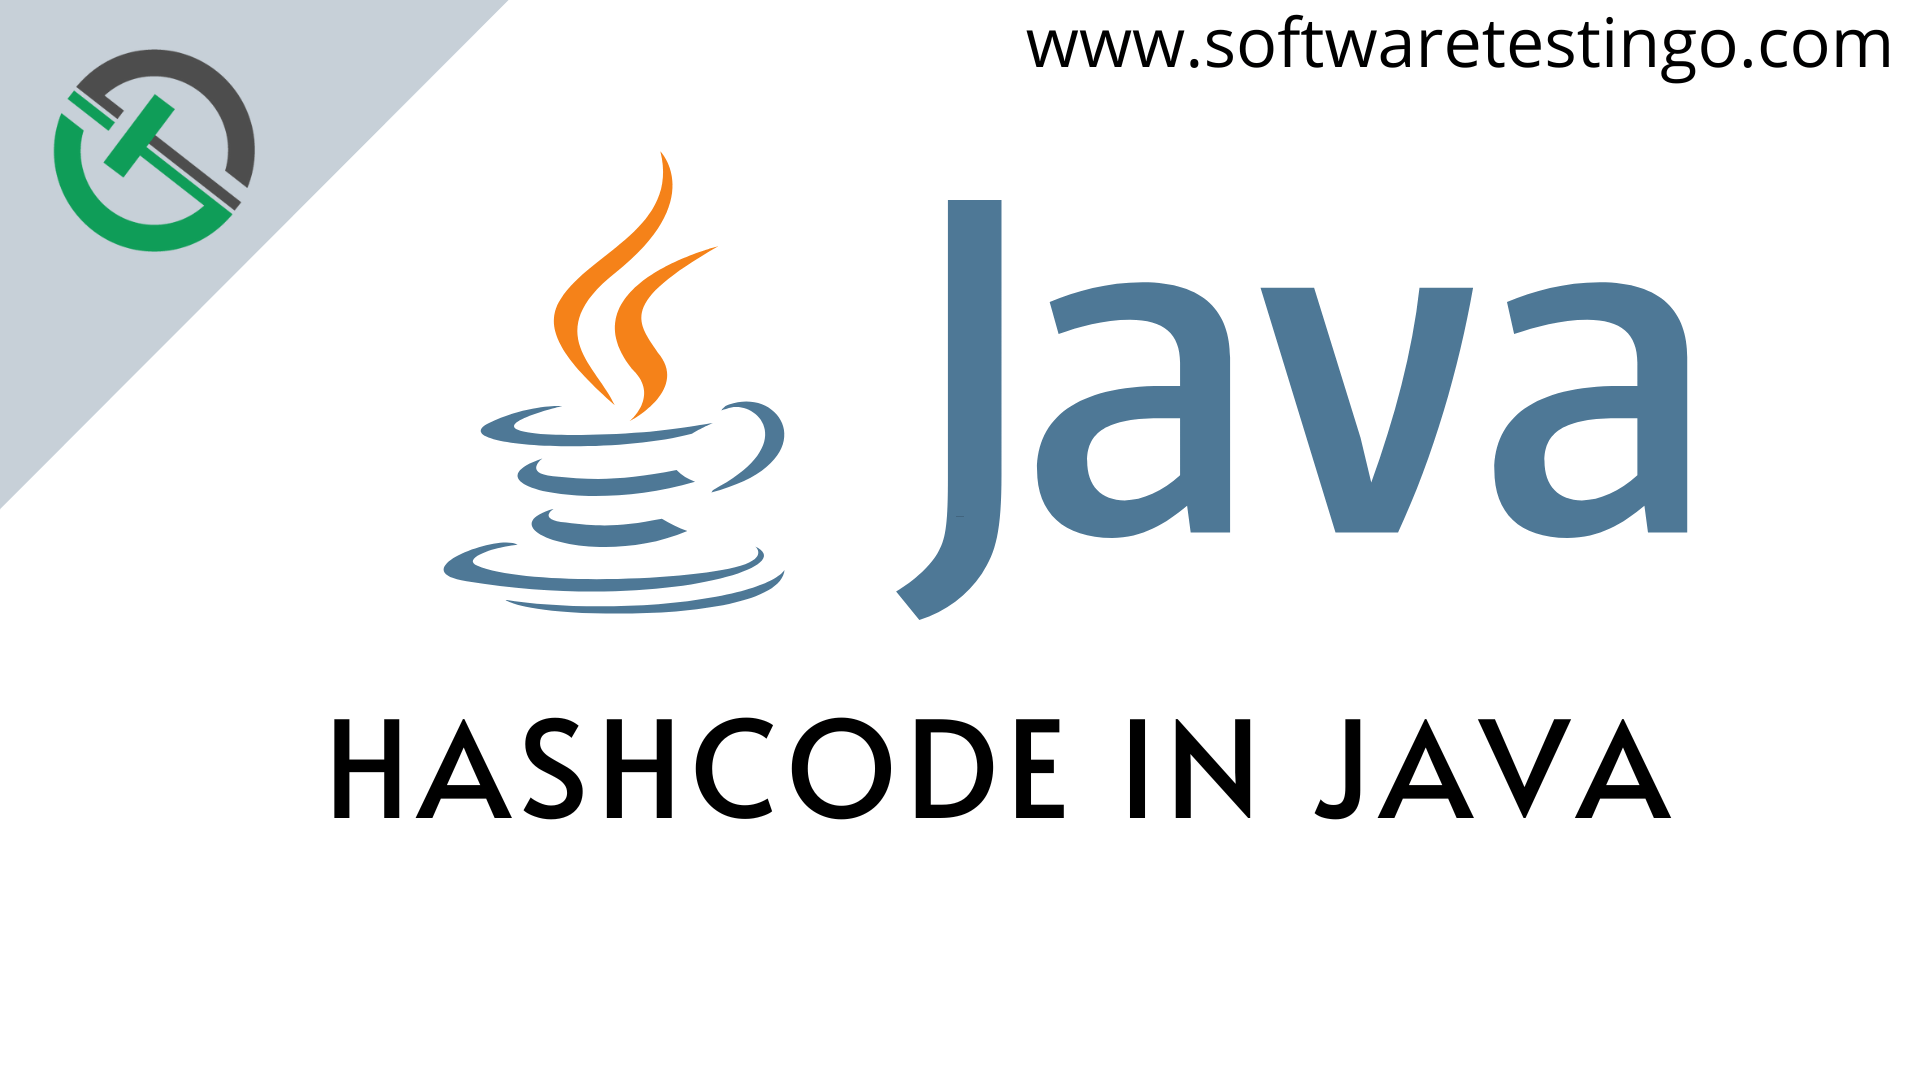 What Is Hashcode In Java